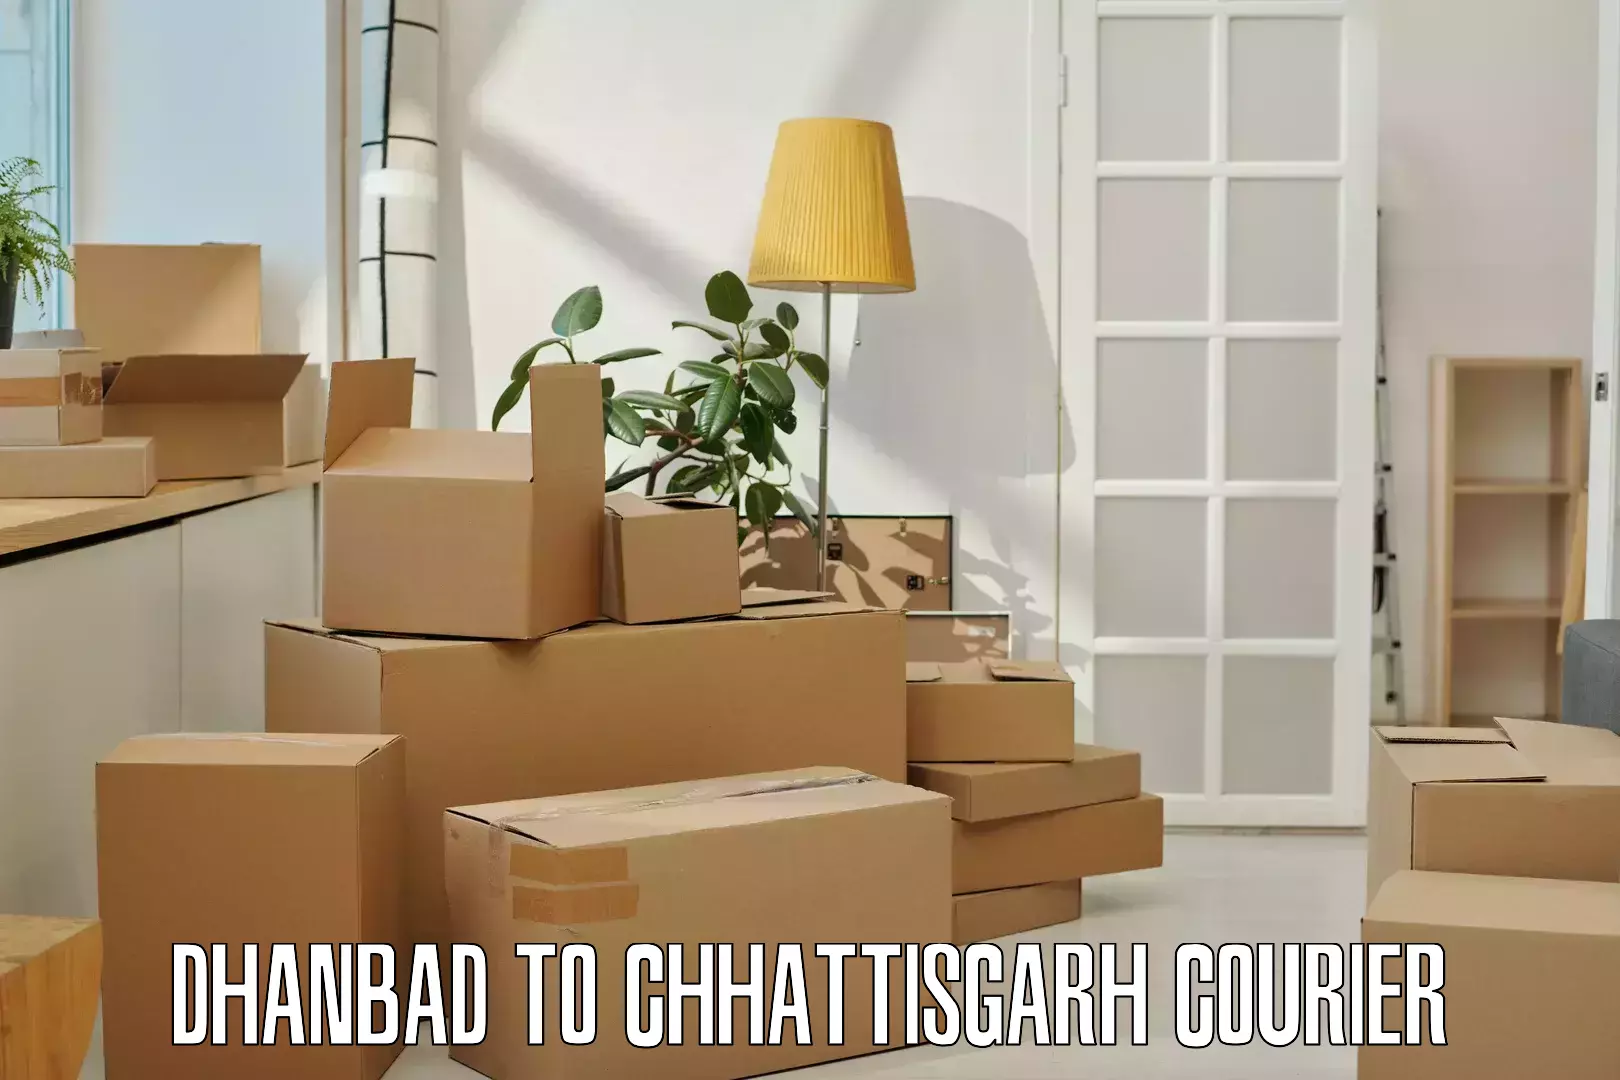 Multi-service courier options Dhanbad to Raipur